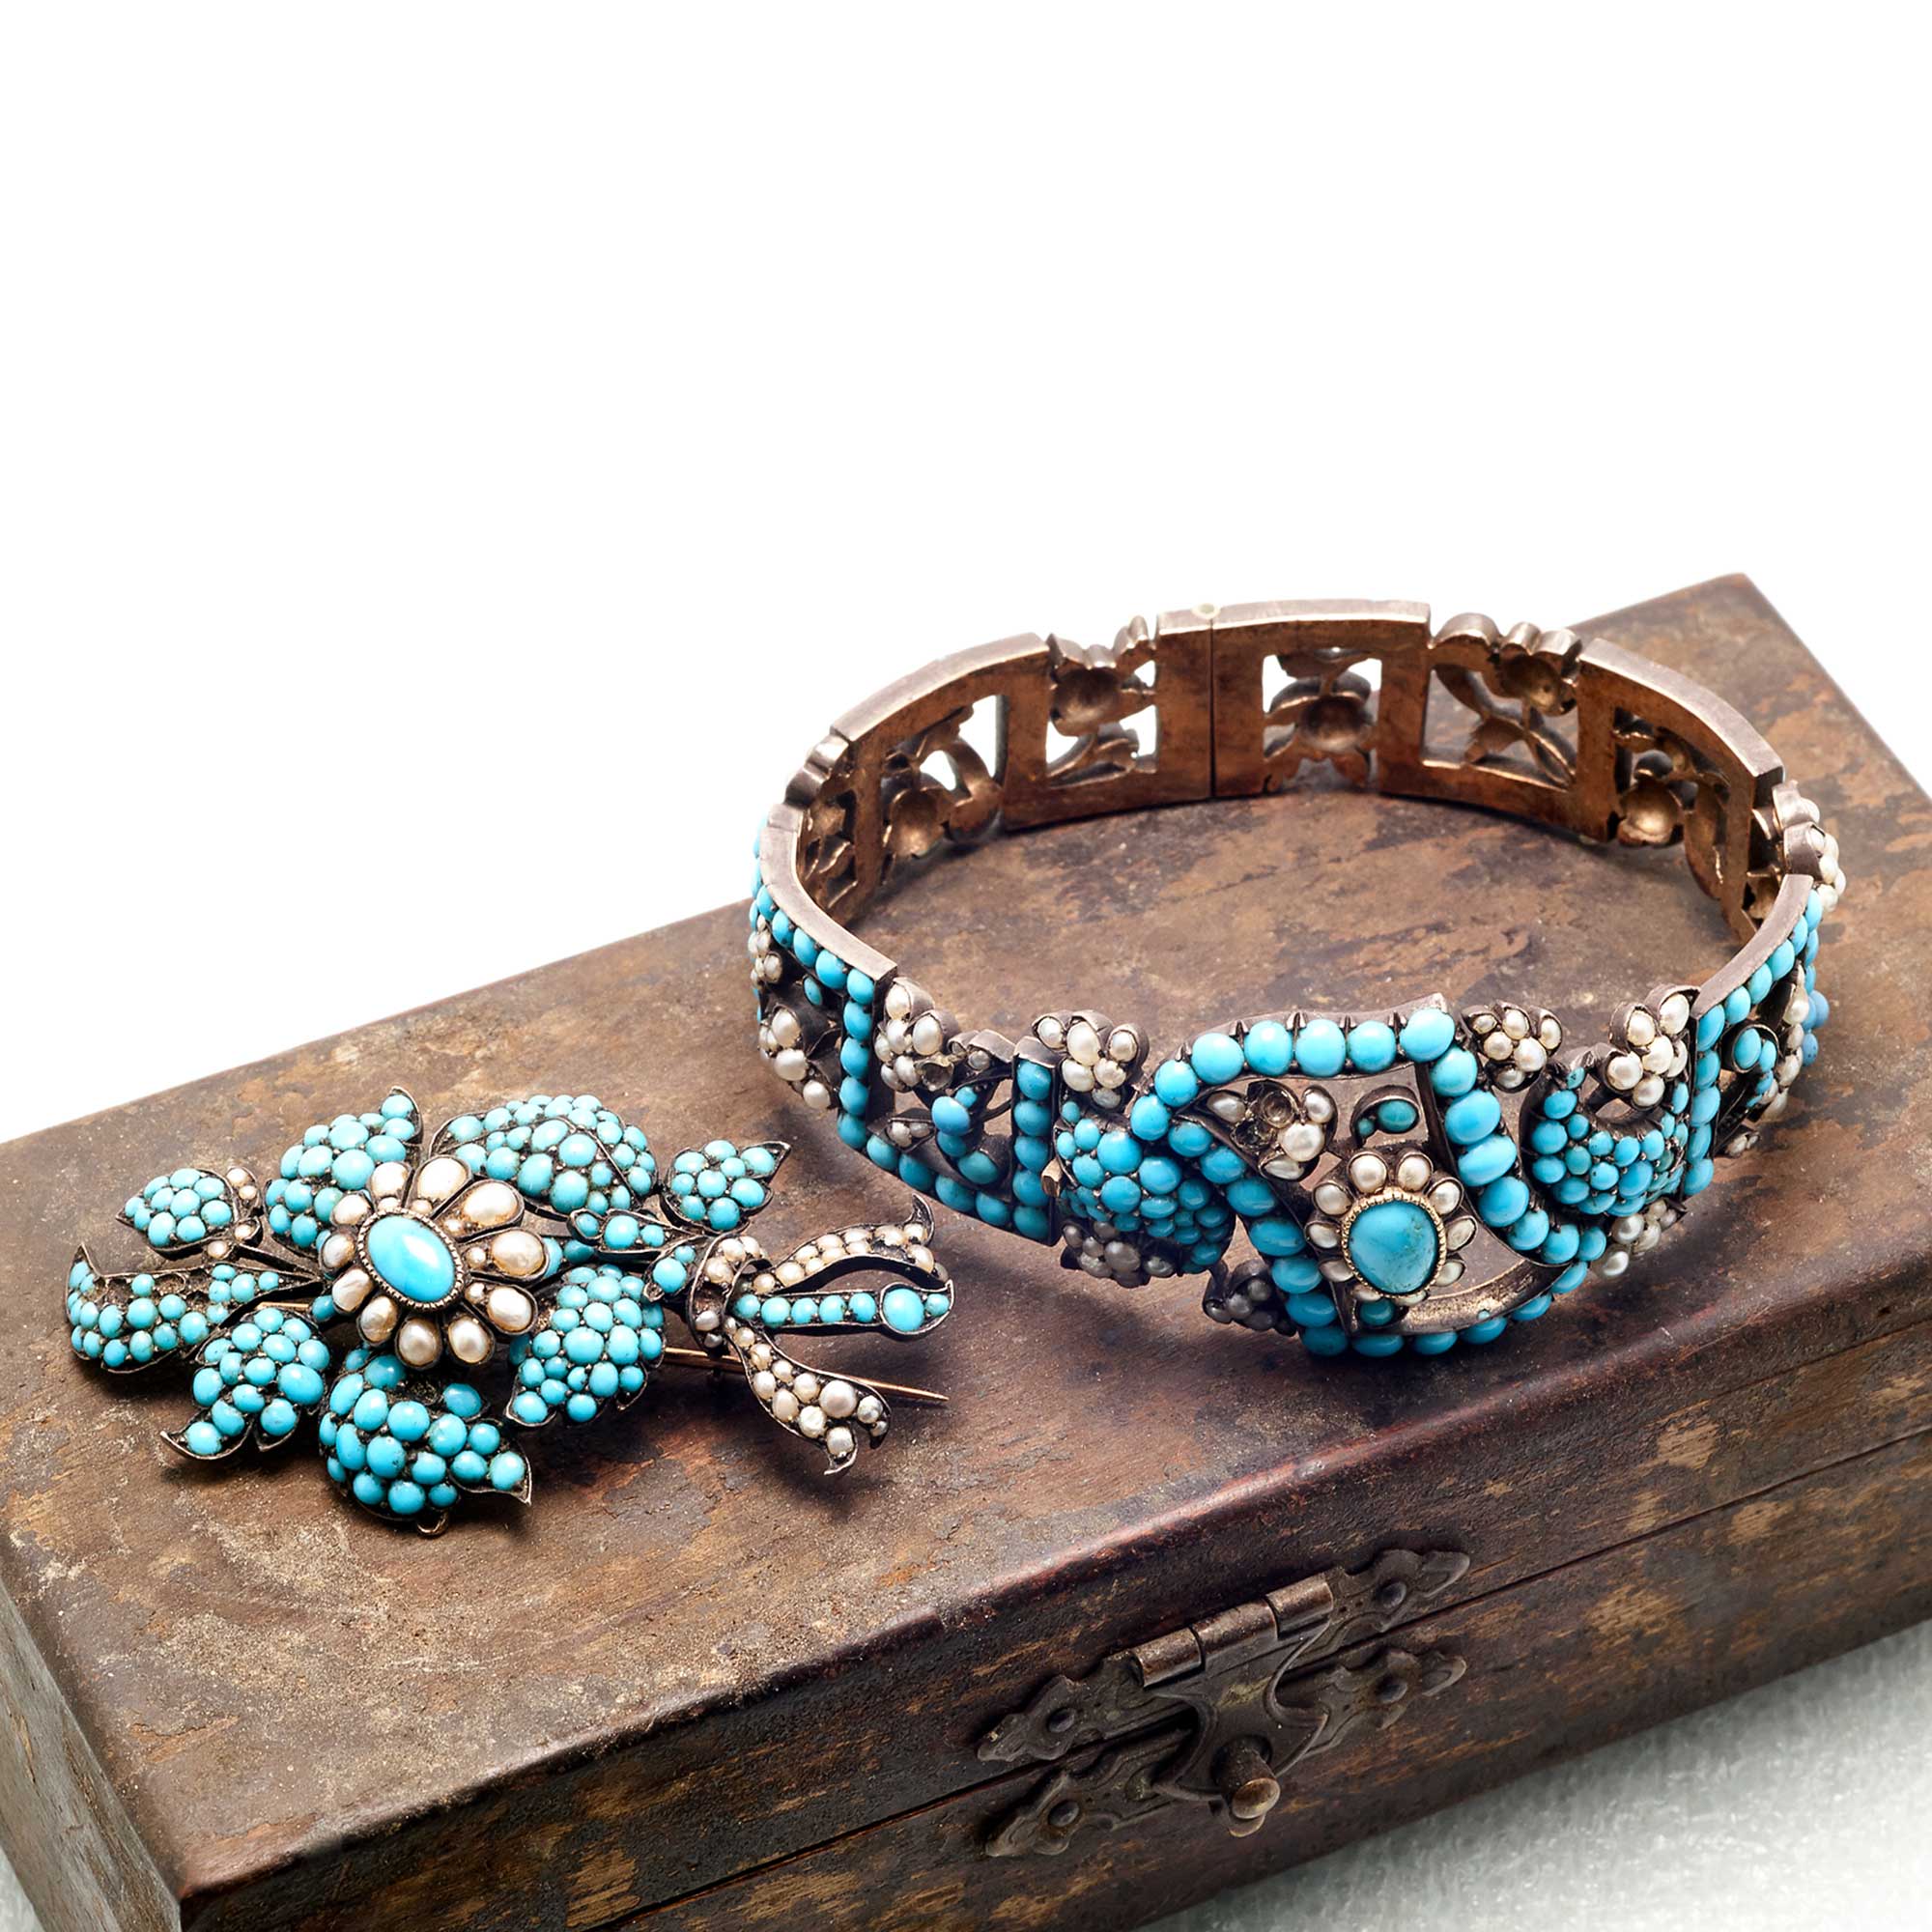 THE ATLANTIC SET: Silver Seed Pearl and Turquoise Bracelet and Brooch